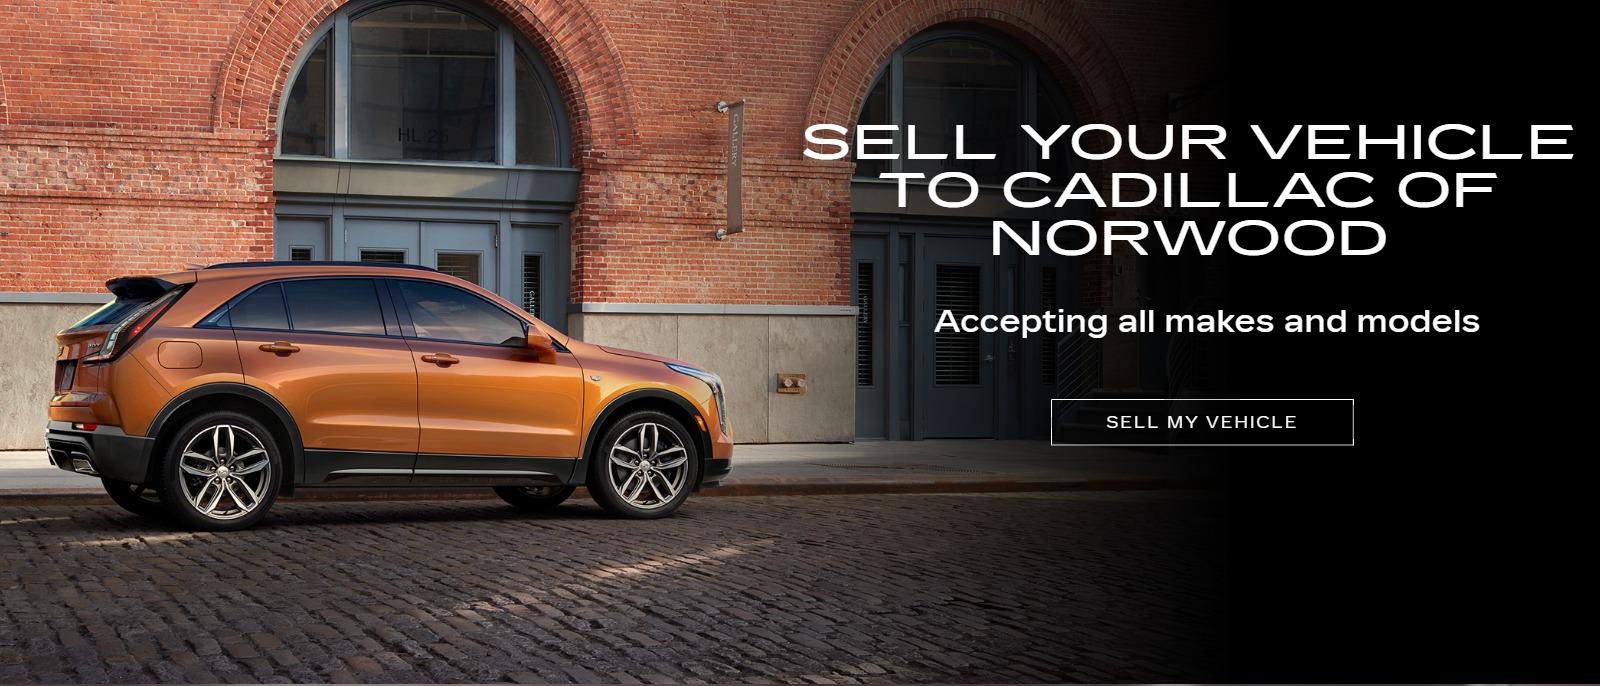 Sell your vehicle to Cadillac of Norwood